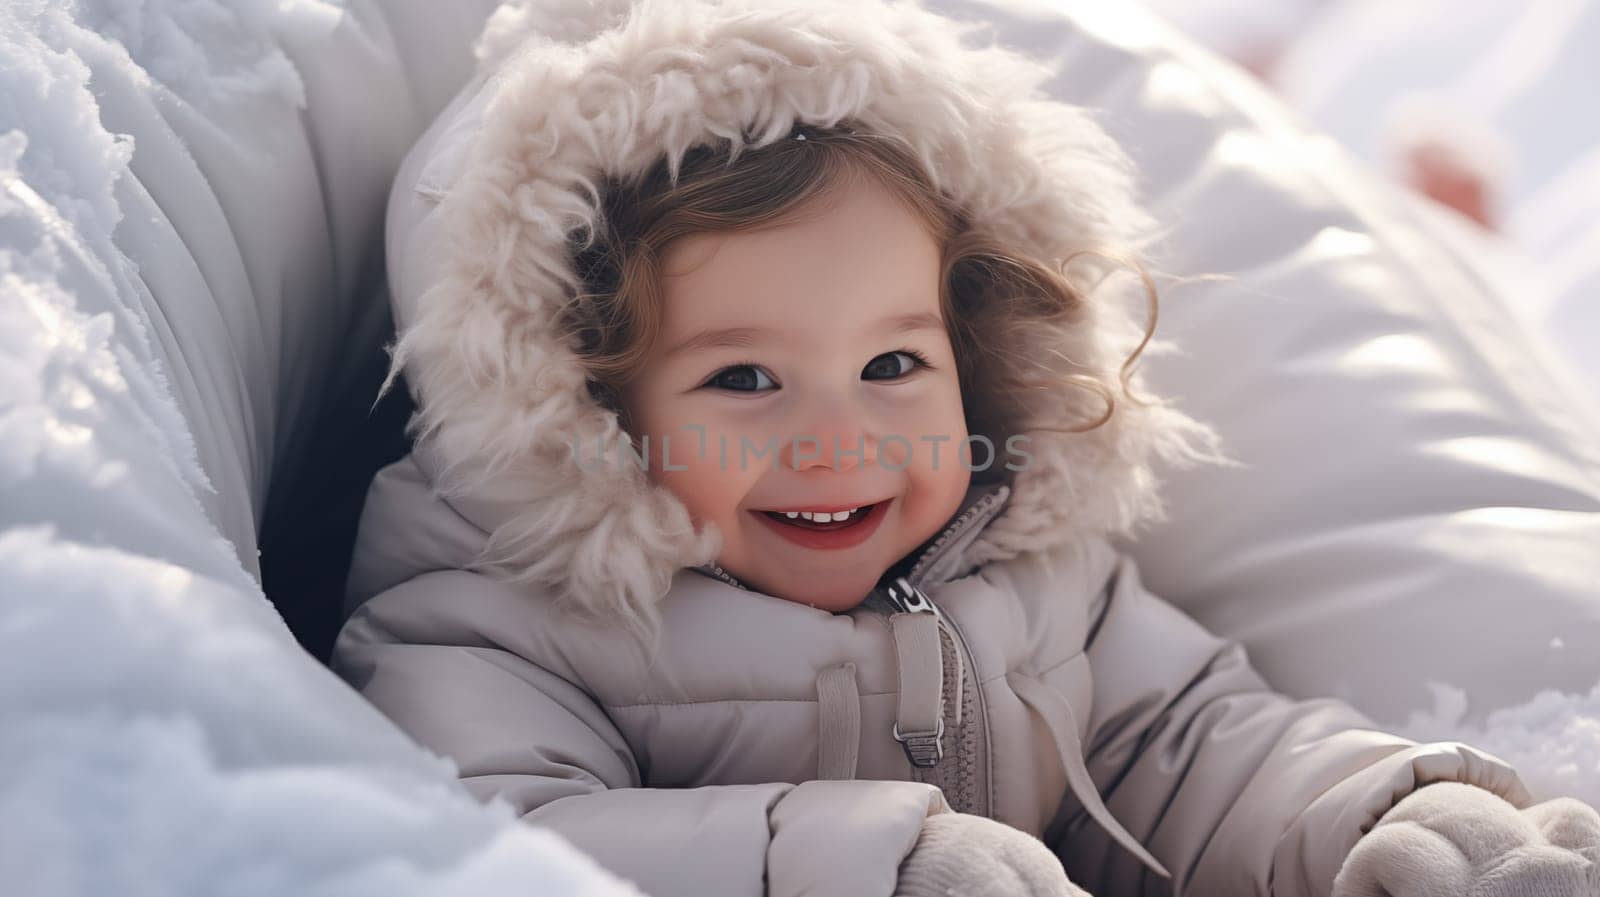 Cute toddler with a windy winter jacket with hood, sitting in a warm blanket in winter, outdoors by Zakharova